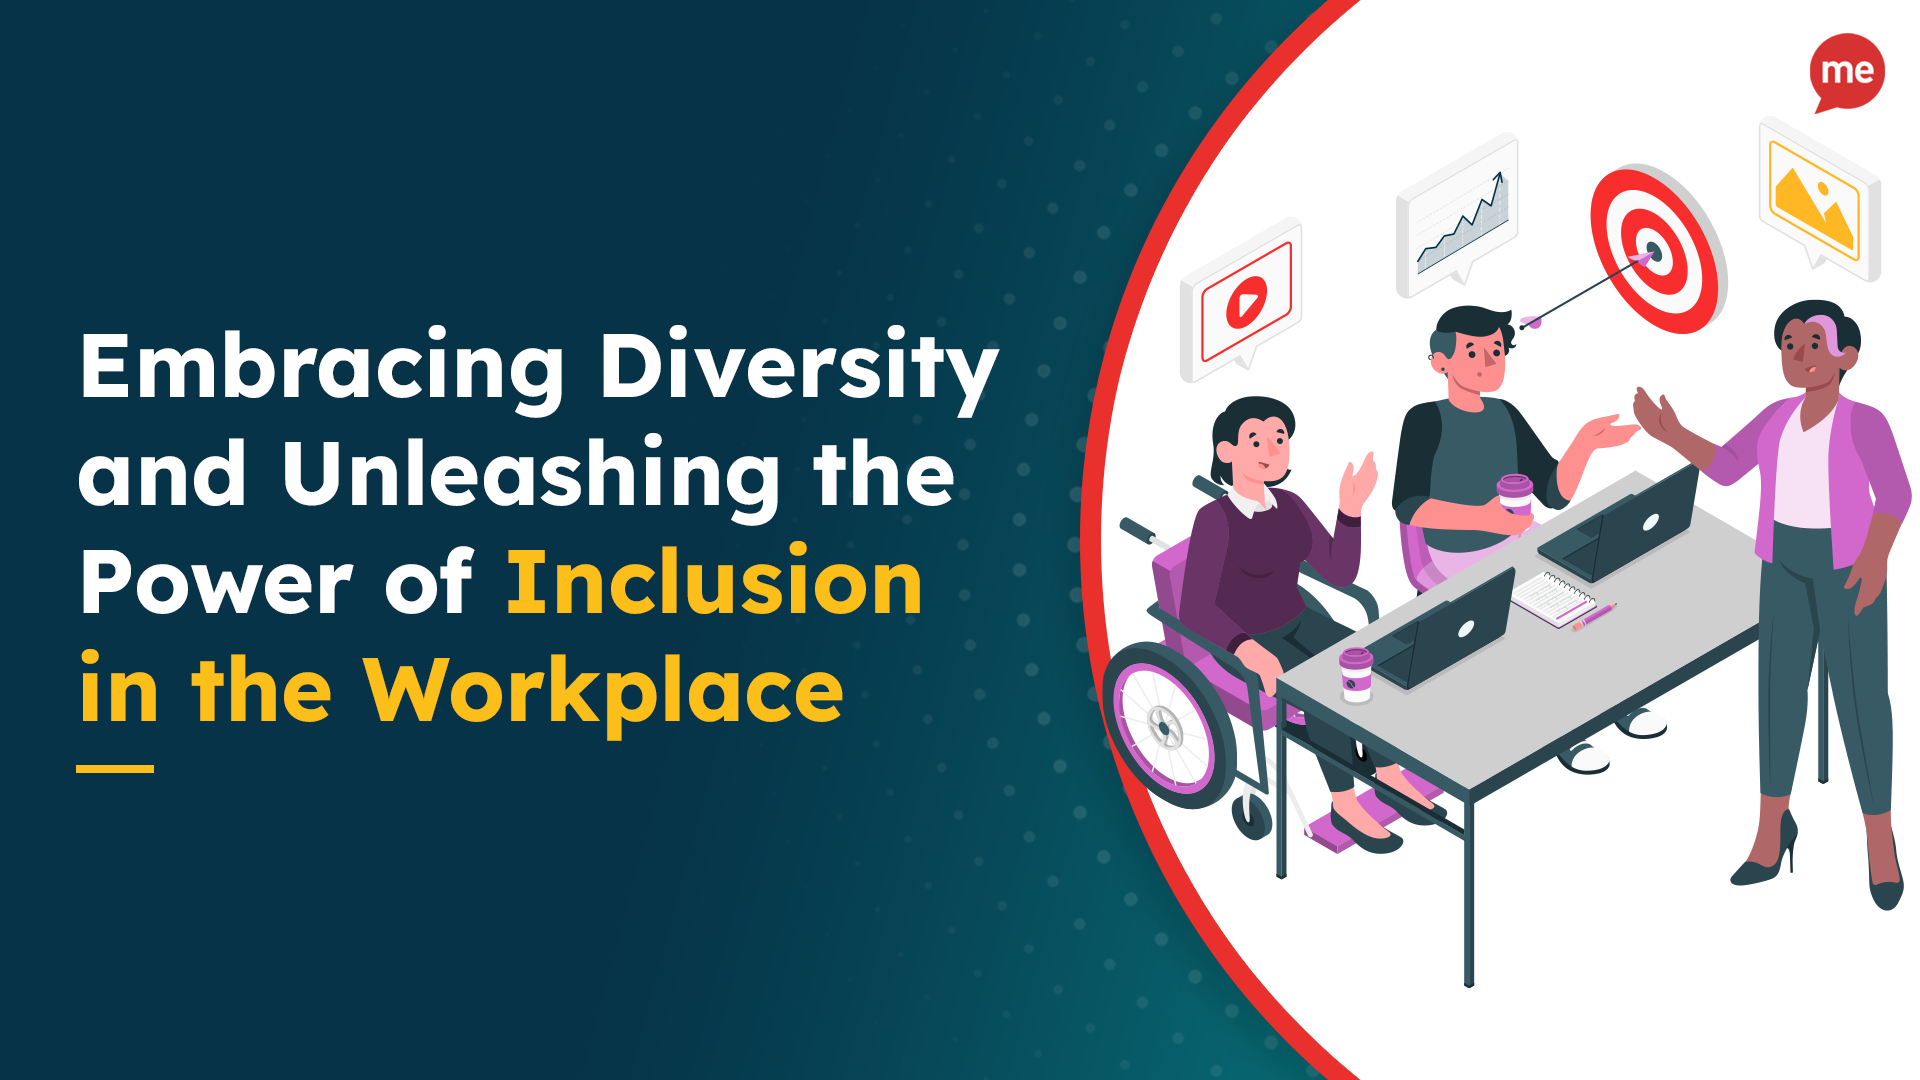 Embracing Diversity and Unleashing the Power of Inclusion in the Workplace